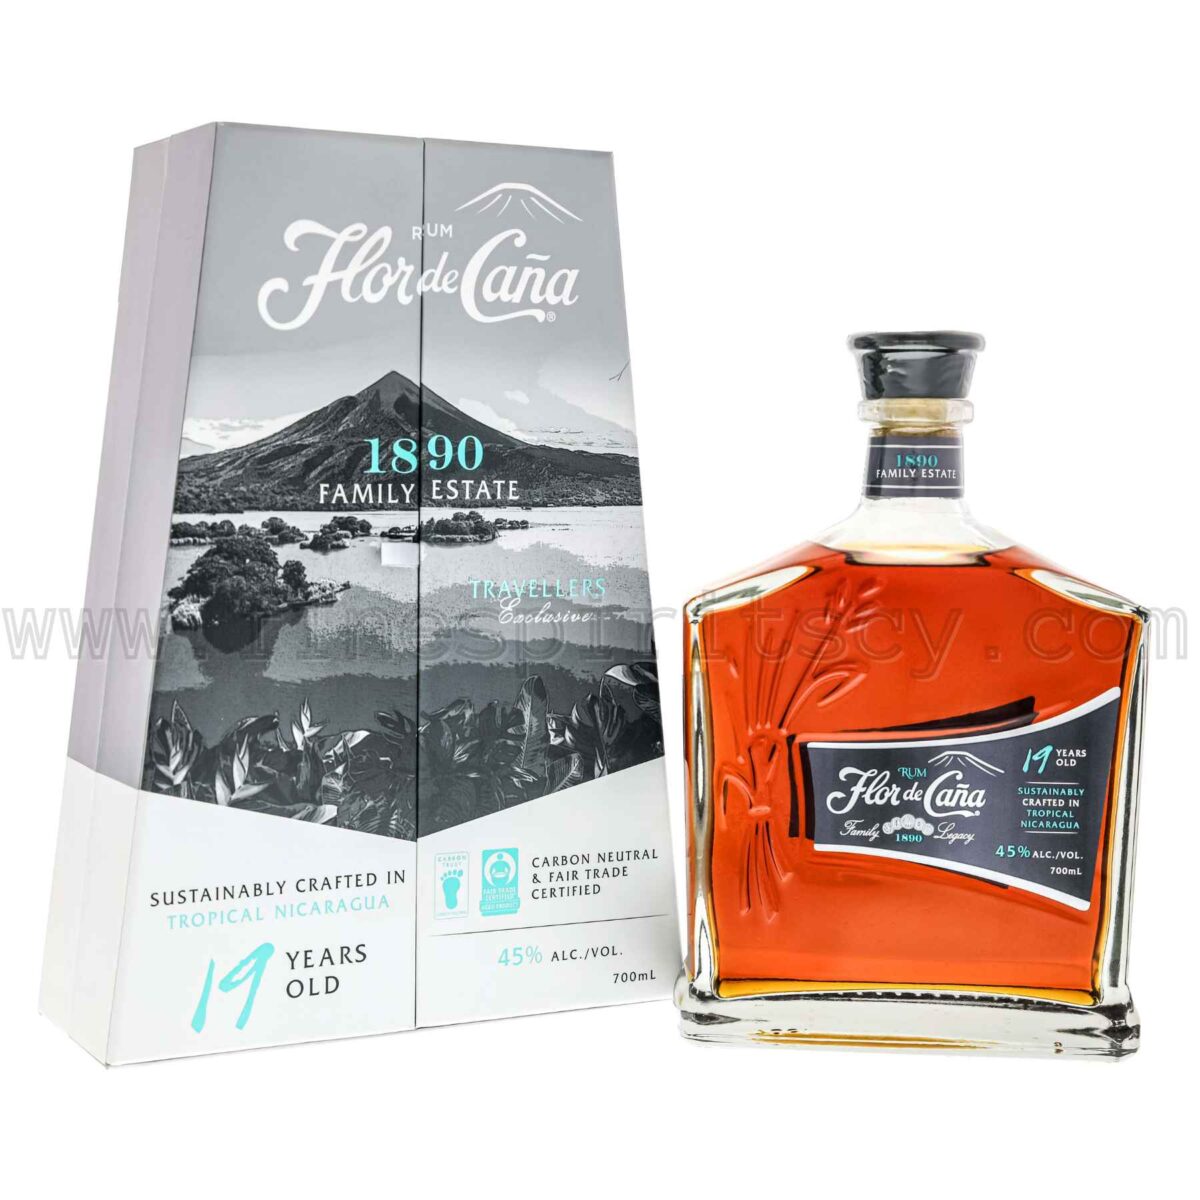 Flor De Cana 19 Year Old Travelers Exclusive Travel Edition Limited